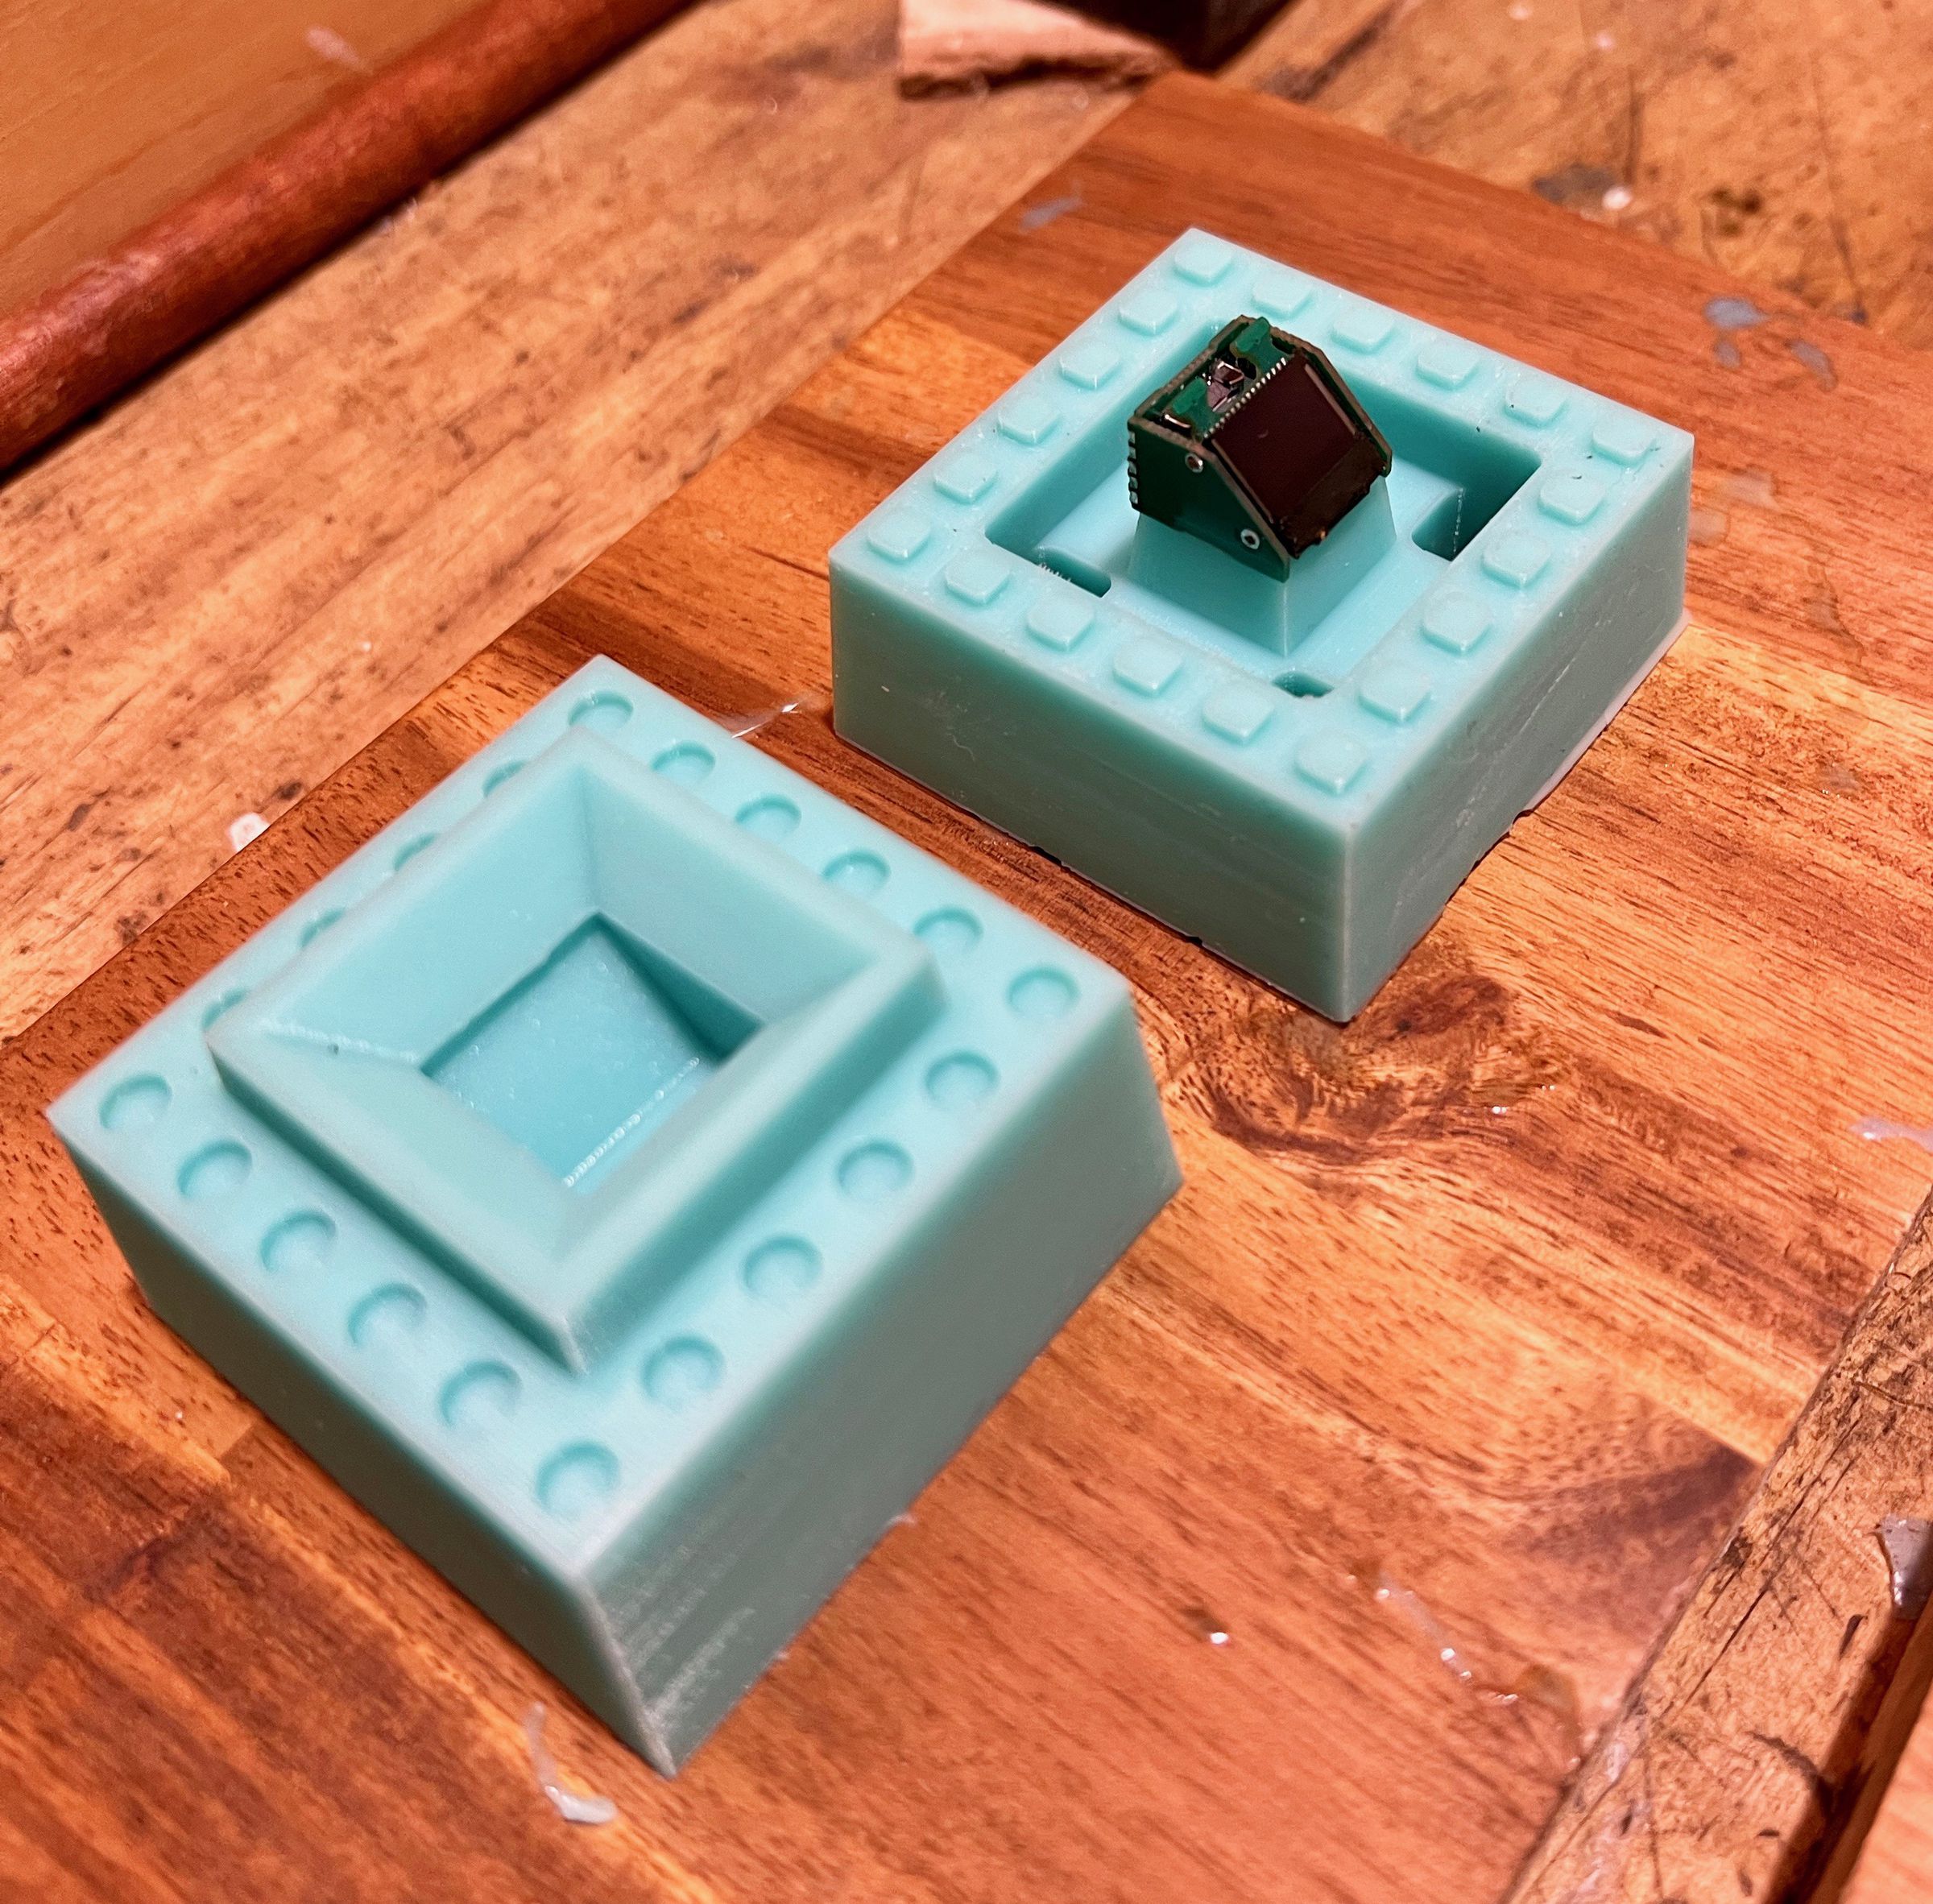 Brown now has a 3D-printed jig as part of his mould. It lets him pour resin to form the brick-computer without first filling the brick’s cavity with silicone.